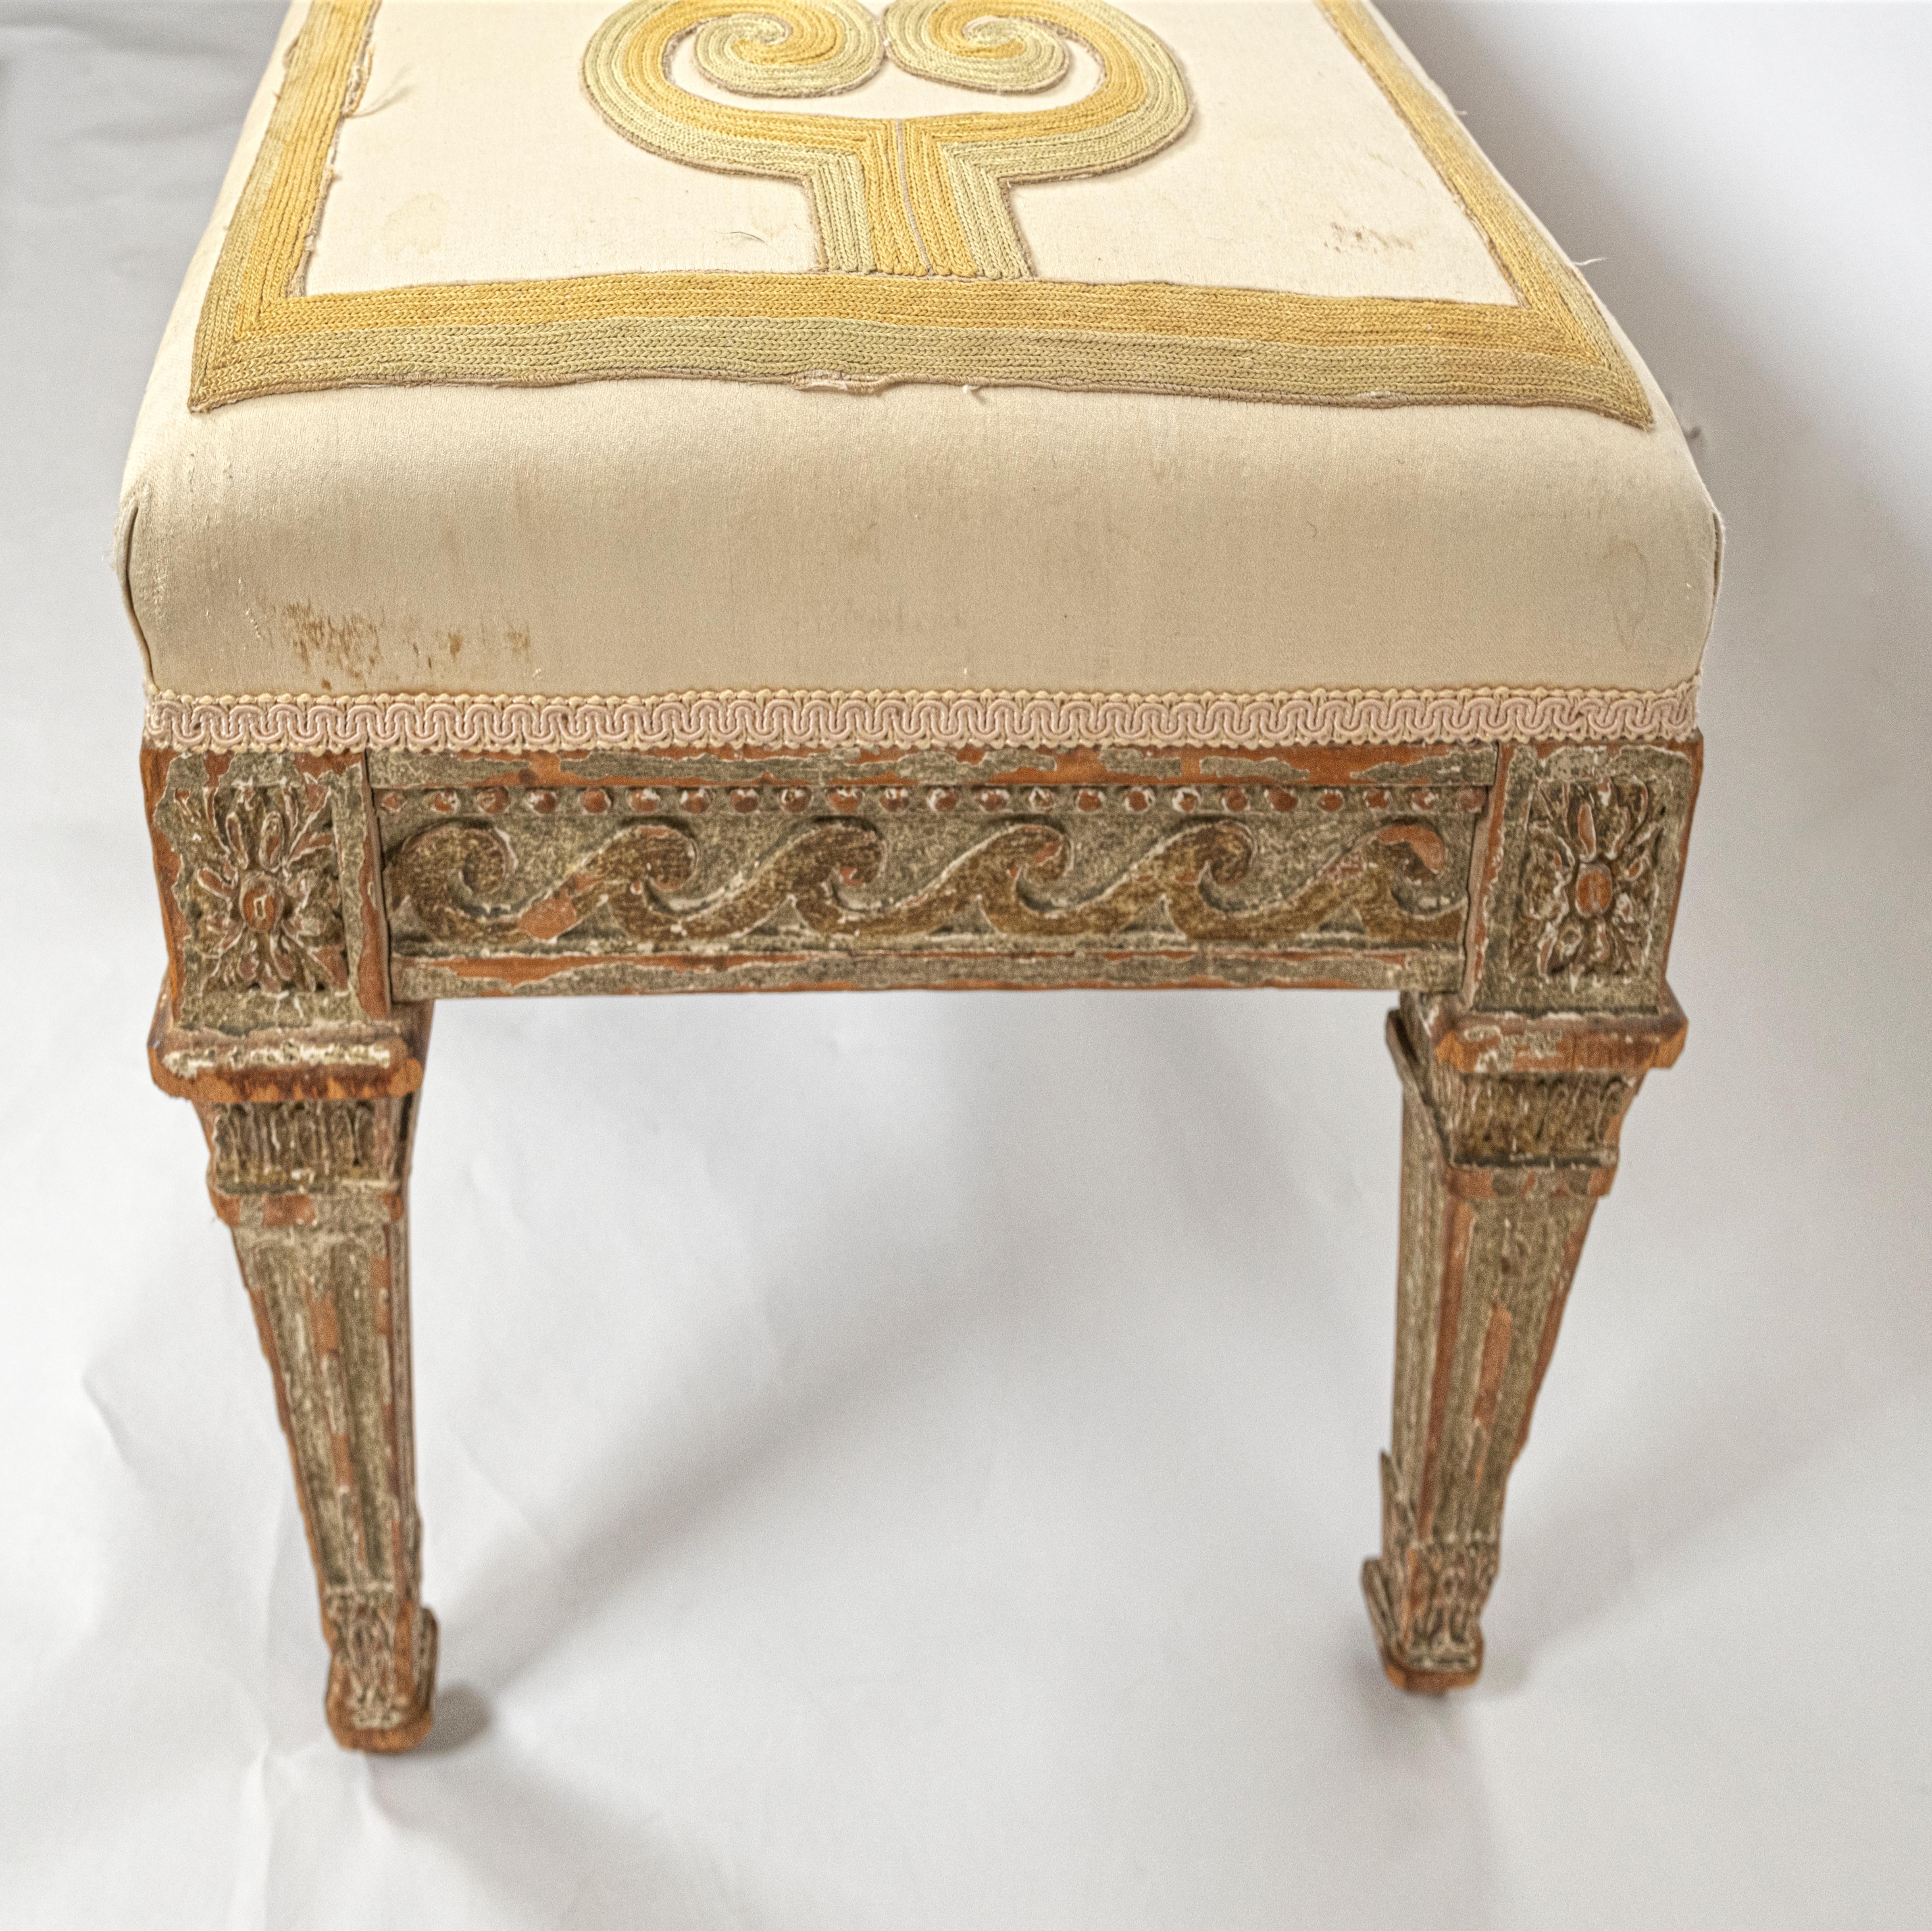 Embroidered Italian Neoclassical-Style Painted Wood Bench For Sale